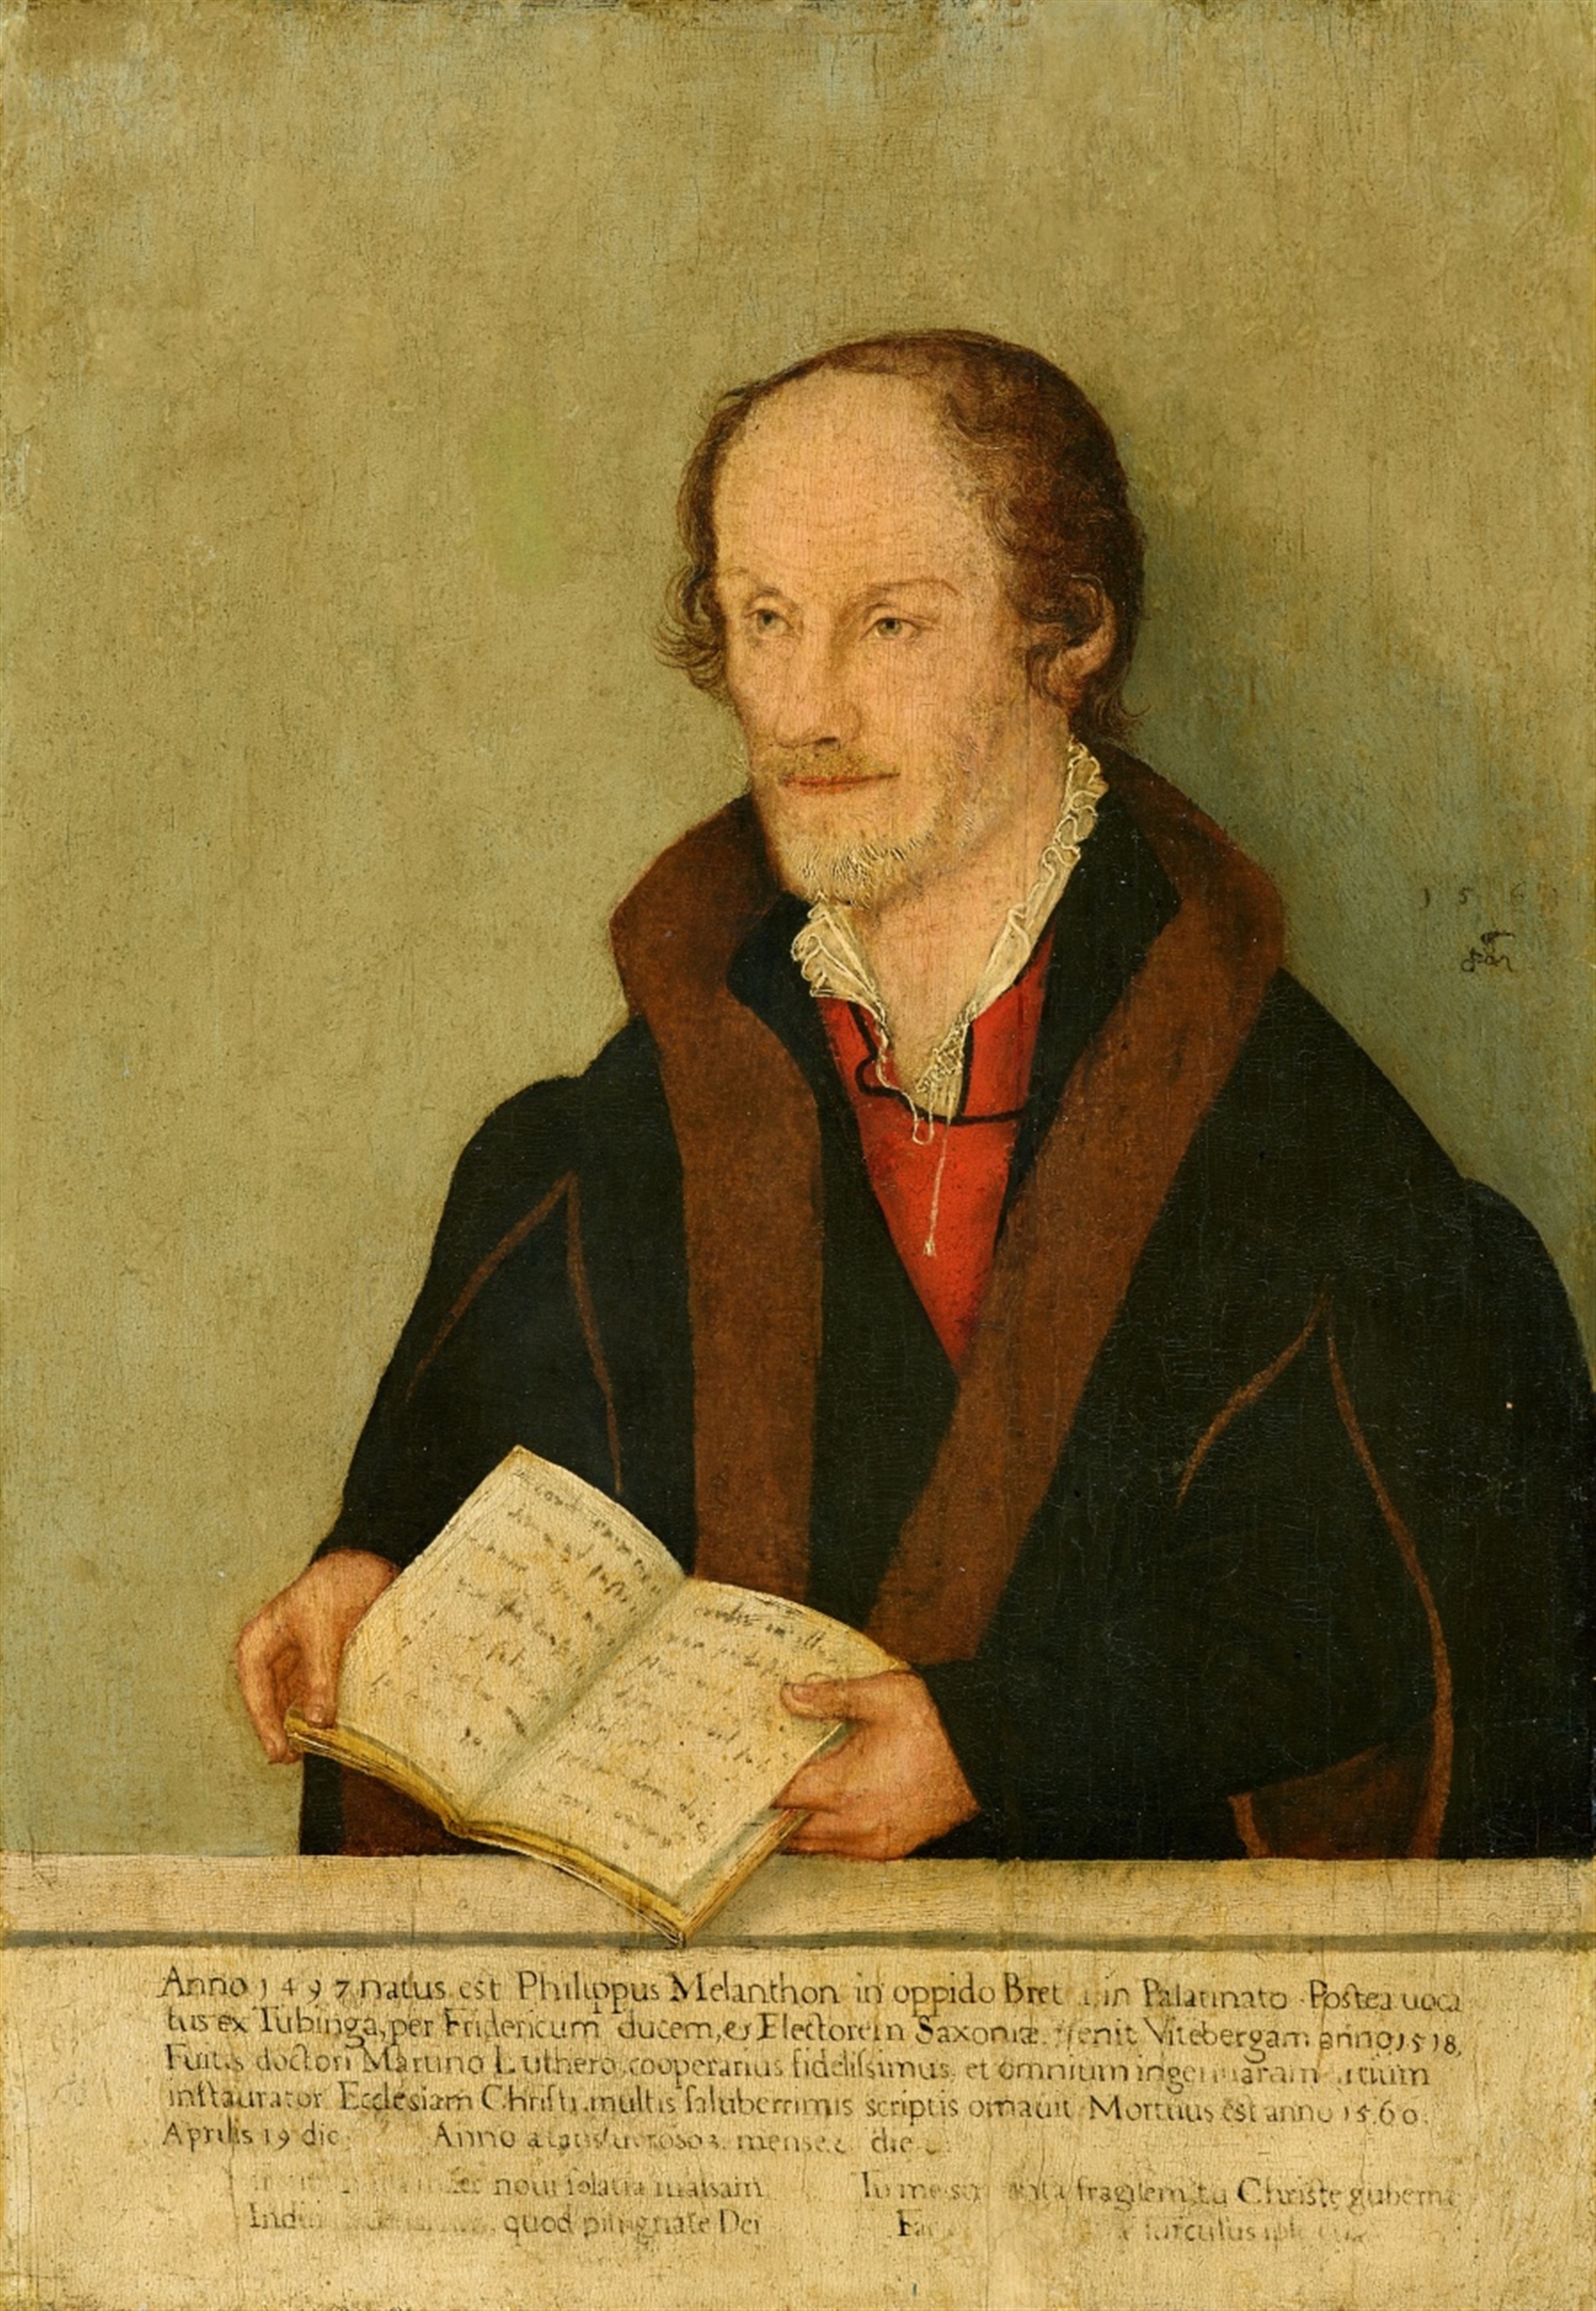 Portrait of Philipp Melanchthon by Lucas Cranach the Younger, 1561